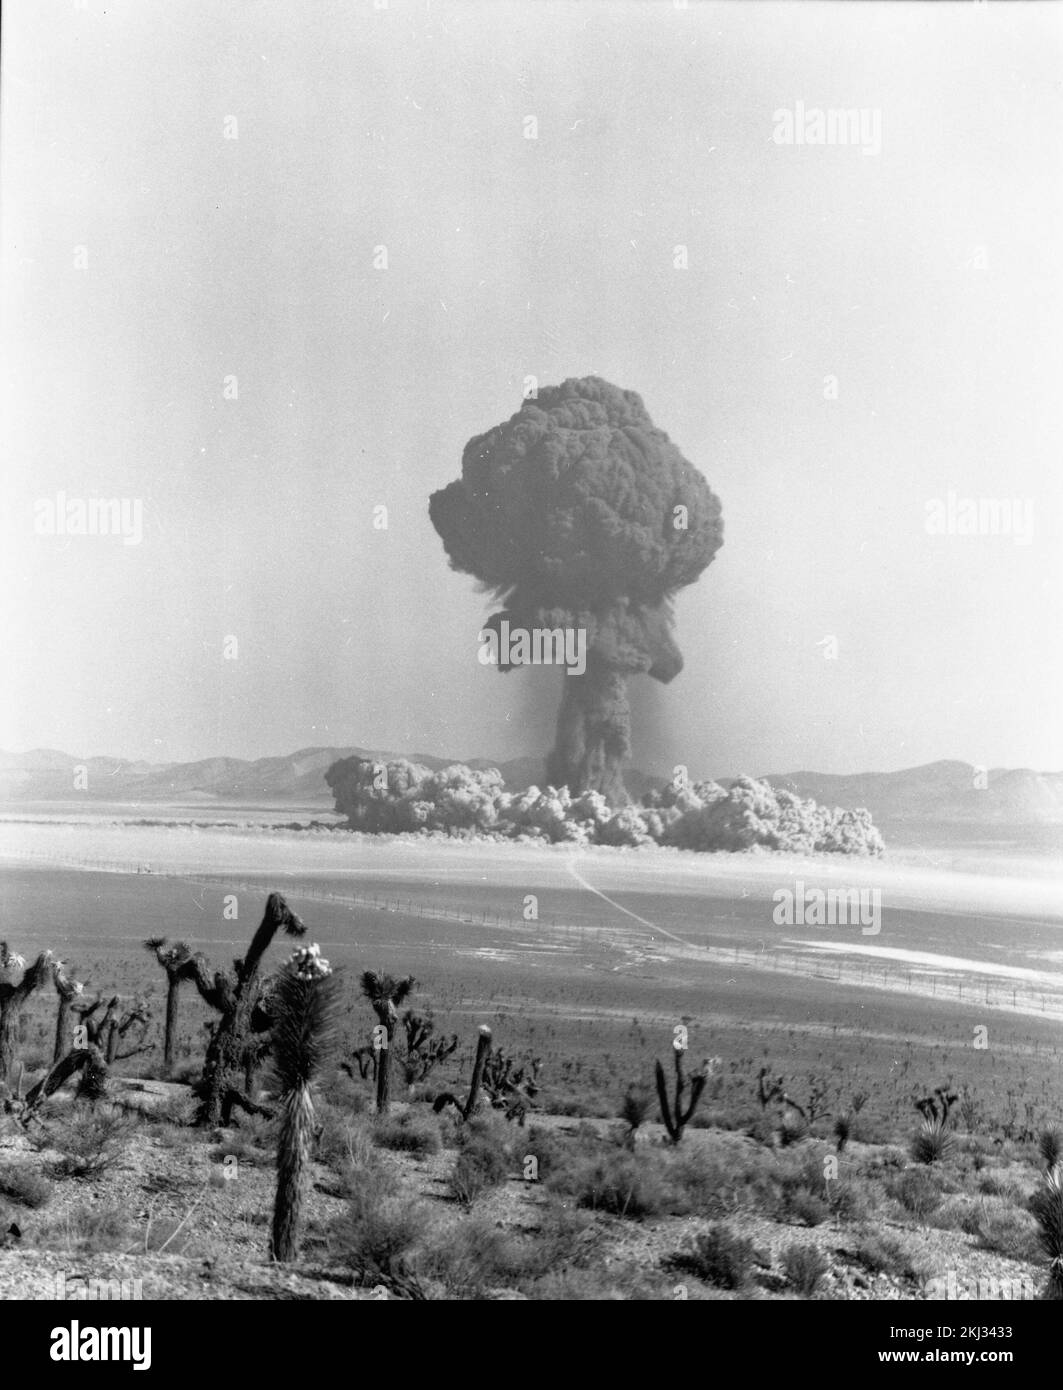 Project 30-65 - Operation Plumbob (Nevada Test Site) Detonation. FIZEAU fireball: Series of 3, ground views (2 of 3). Photographs of Atmospheric Nuclear Testing at Pacific Island and Nevada Test Sites. Stock Photo